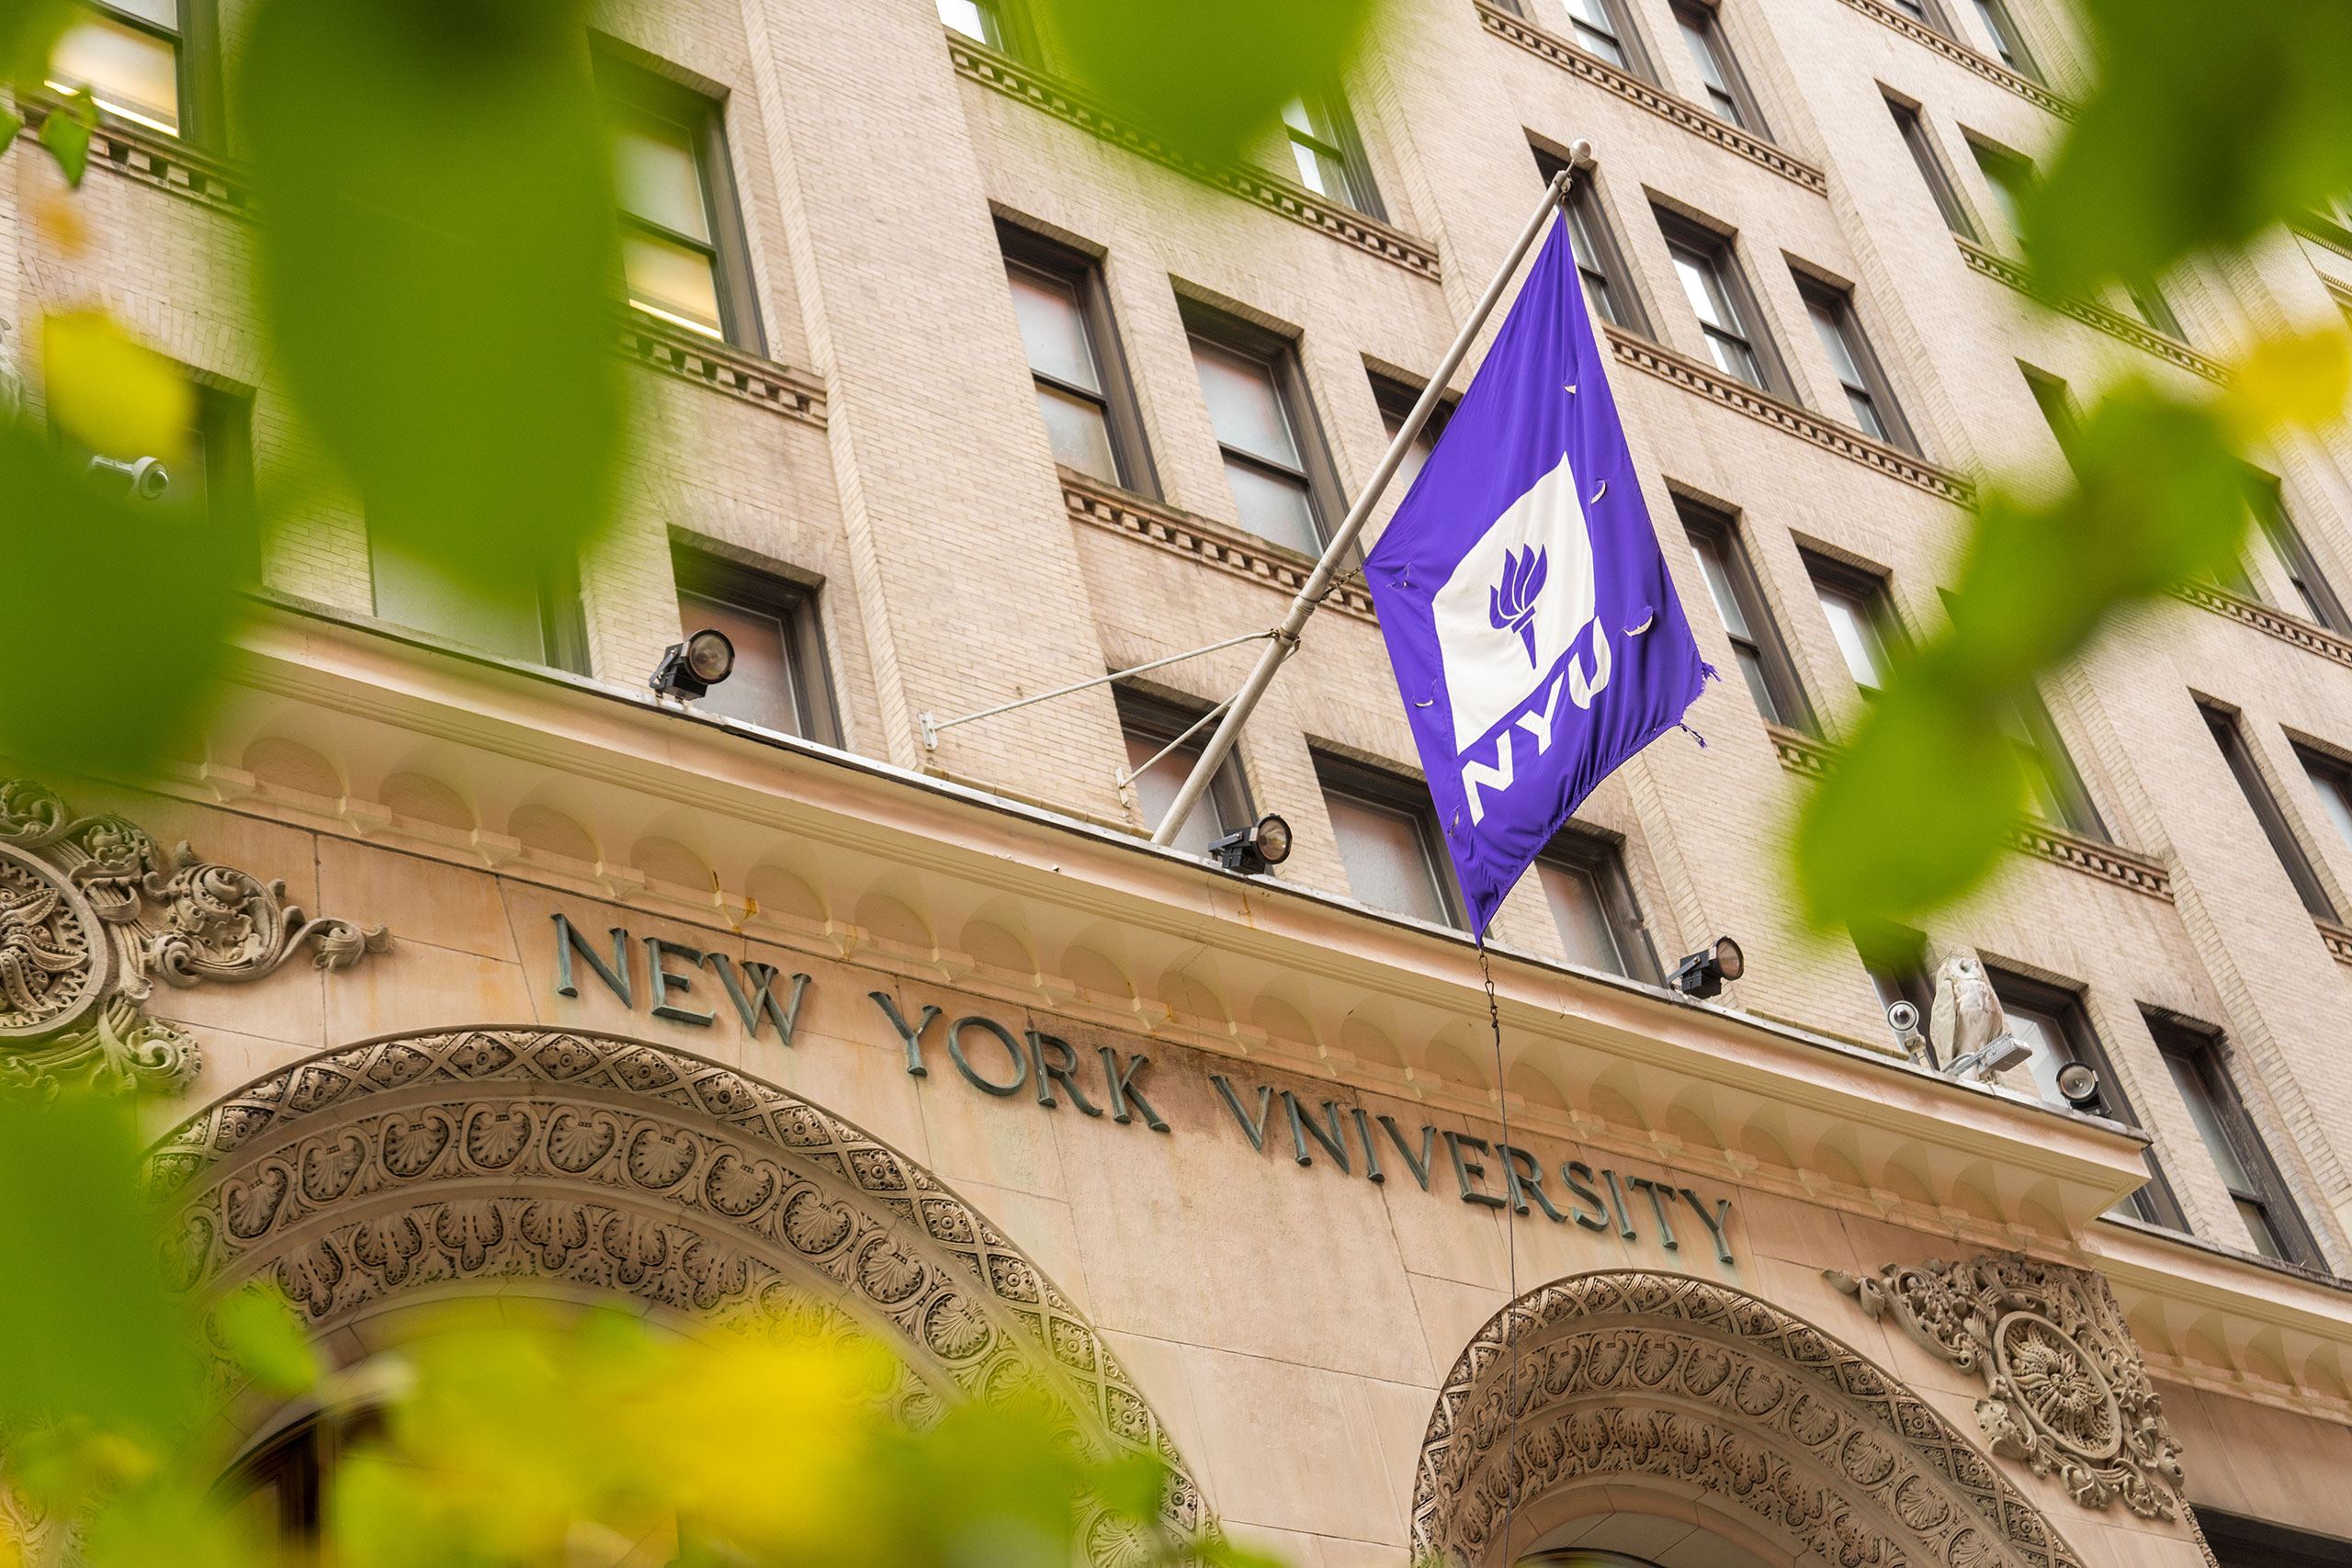 NYU flag hanging from a university building.